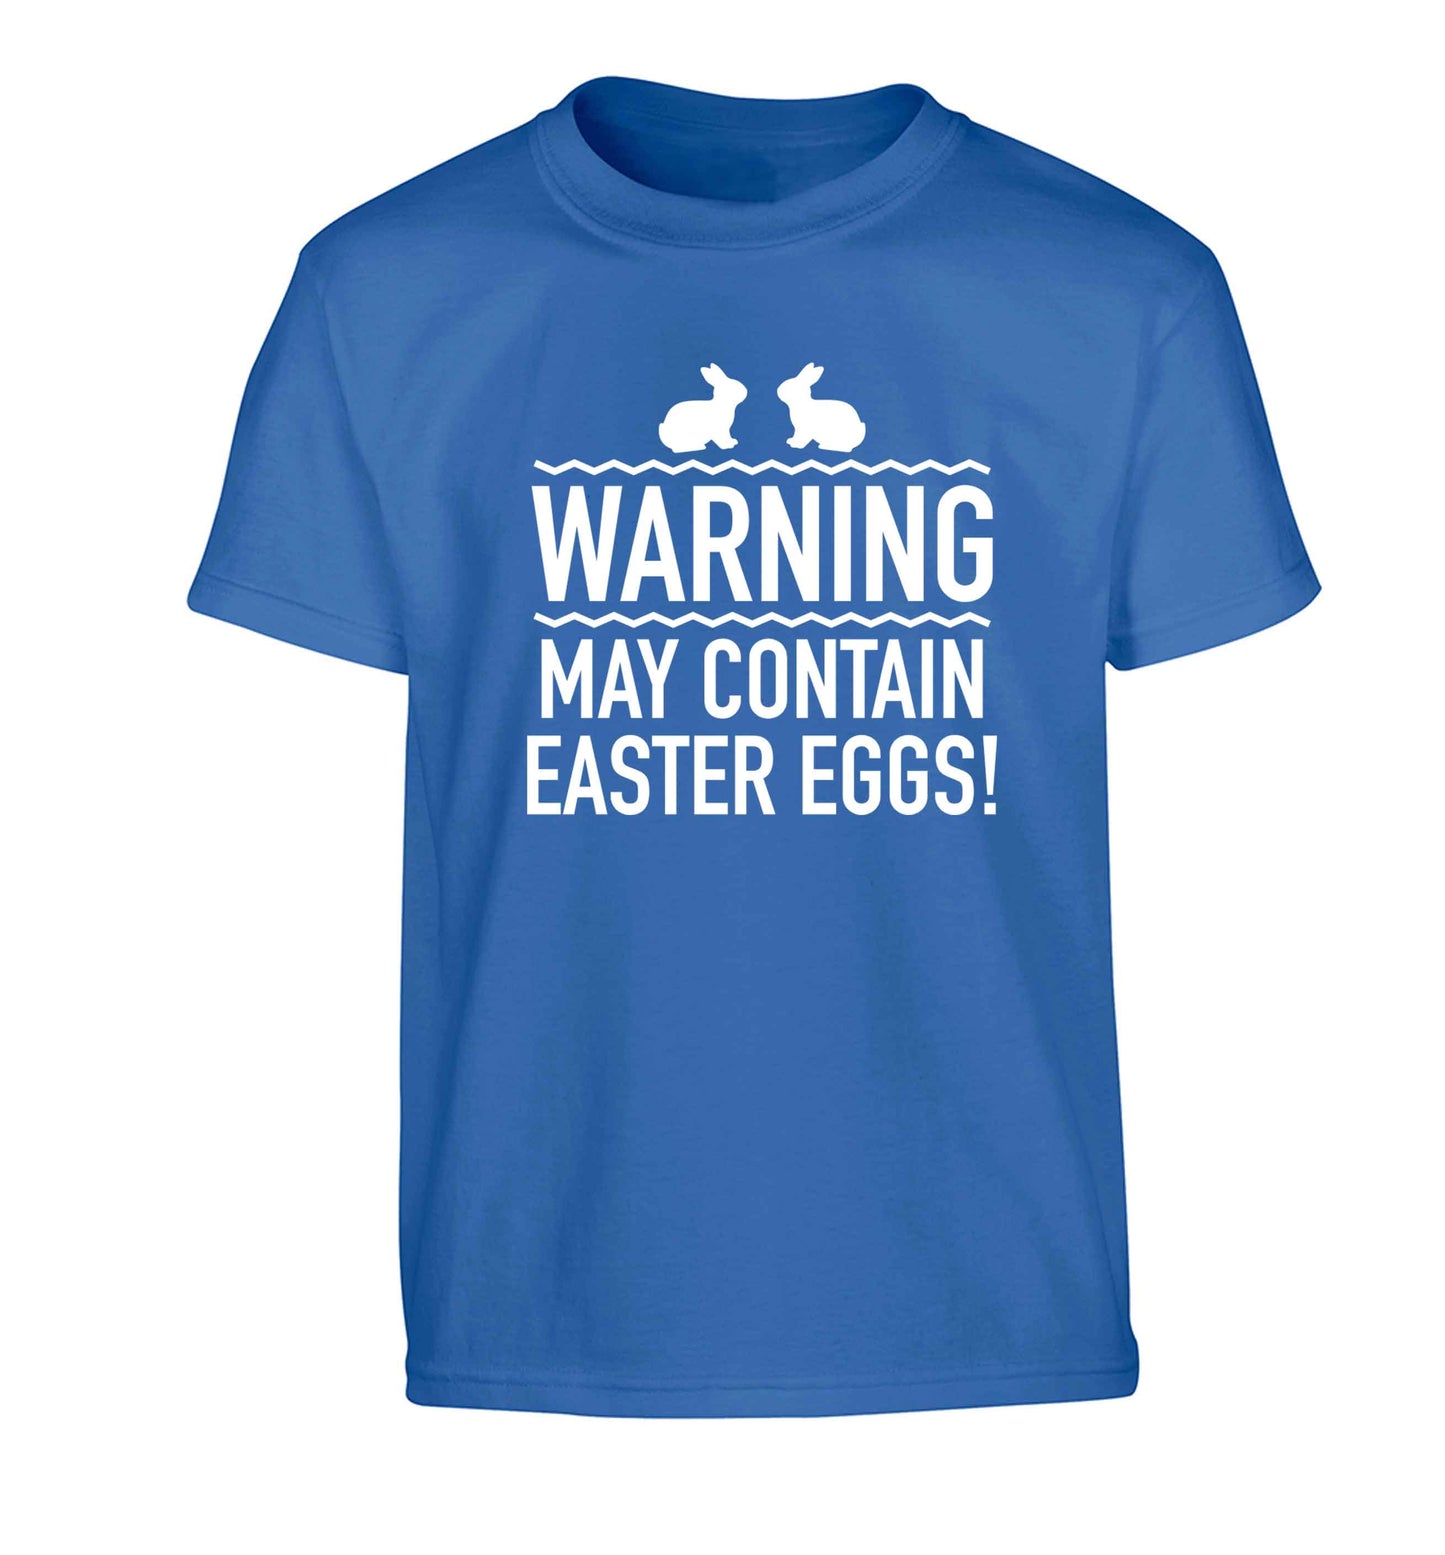 Warning may contain Easter eggs Children's blue Tshirt 12-13 Years